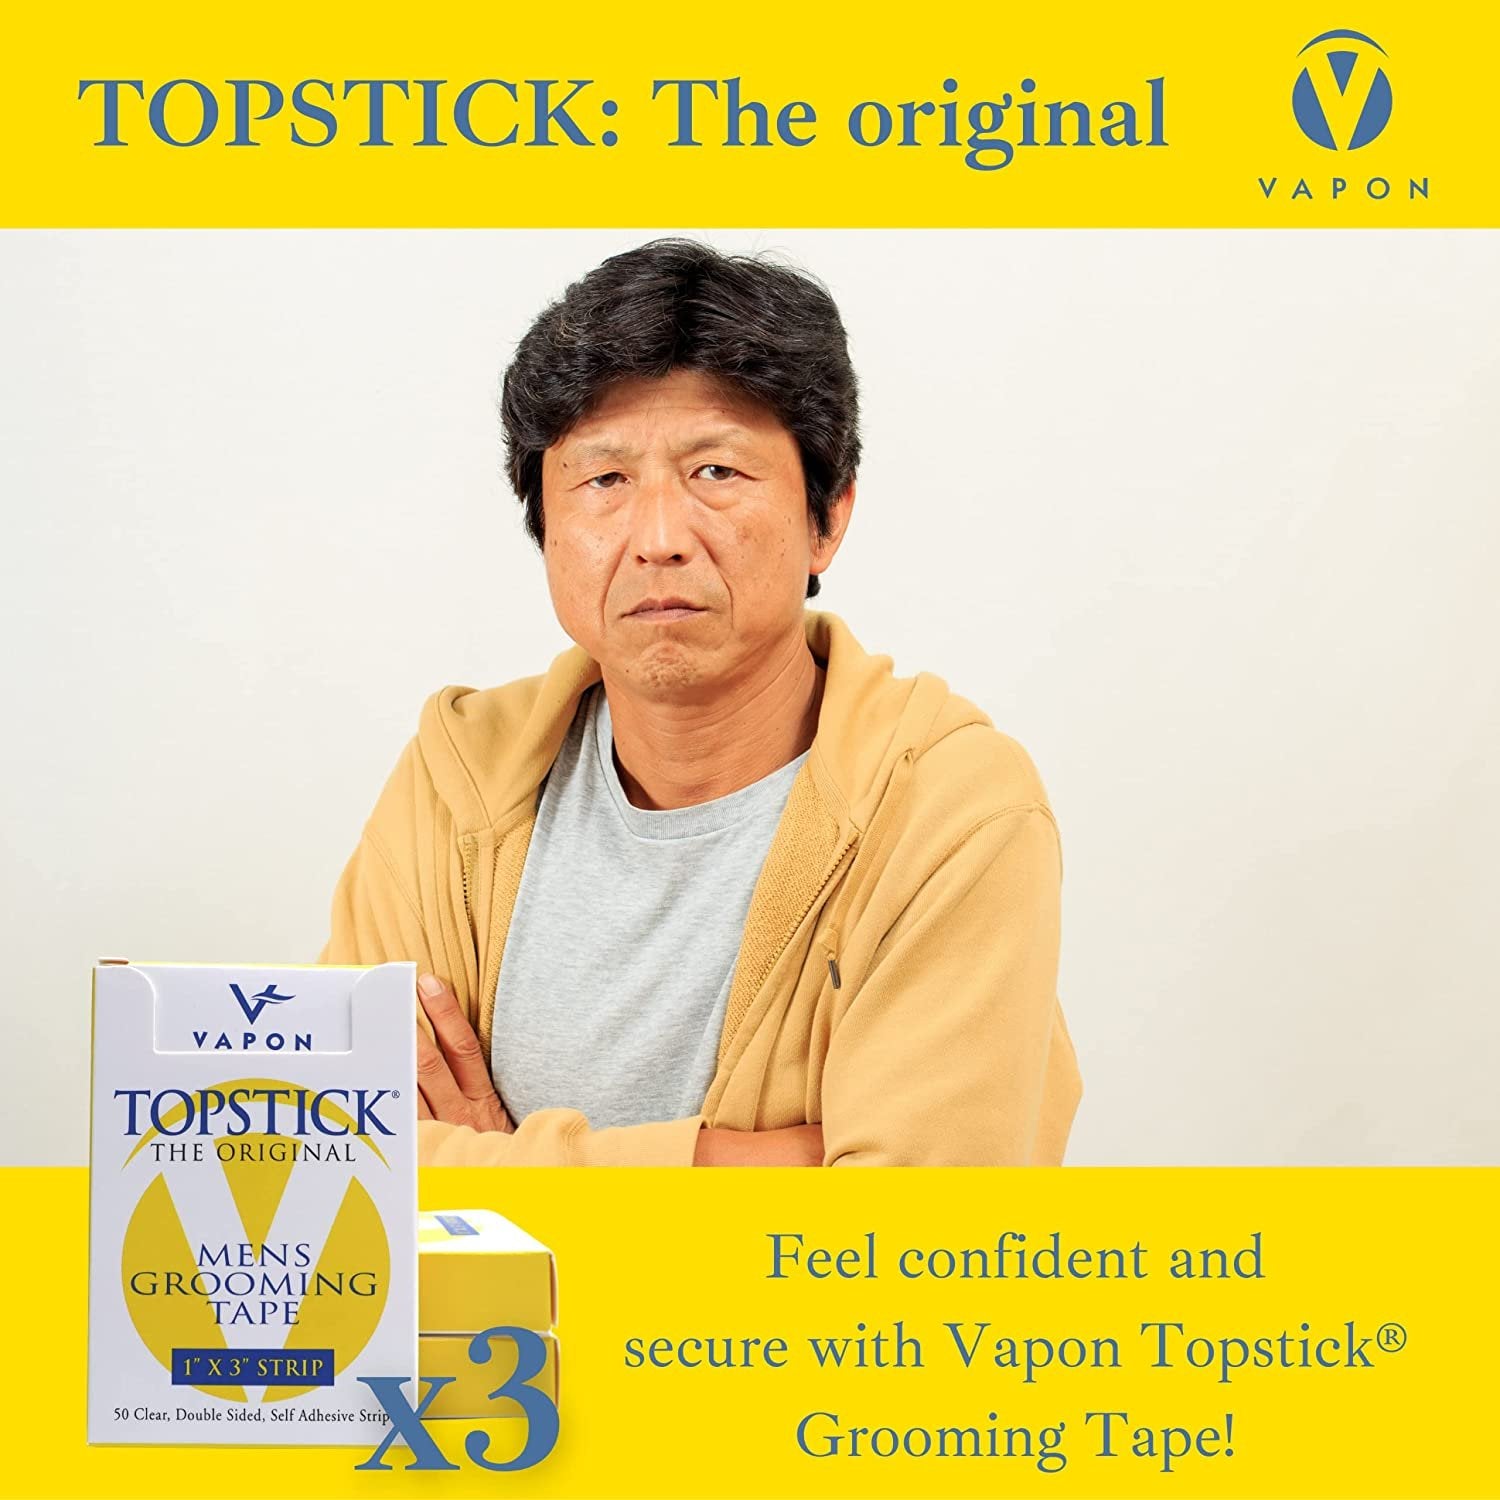 Vapon Topstick - The Original Men's Grooming Tape - 150 Count 3 Boxes - 1" x 3" Double Sided, Self Adhesive, Clear Tape for Toupee and Wig Adhesion - Hypo Allergenic, Waterproof, and Latex Free